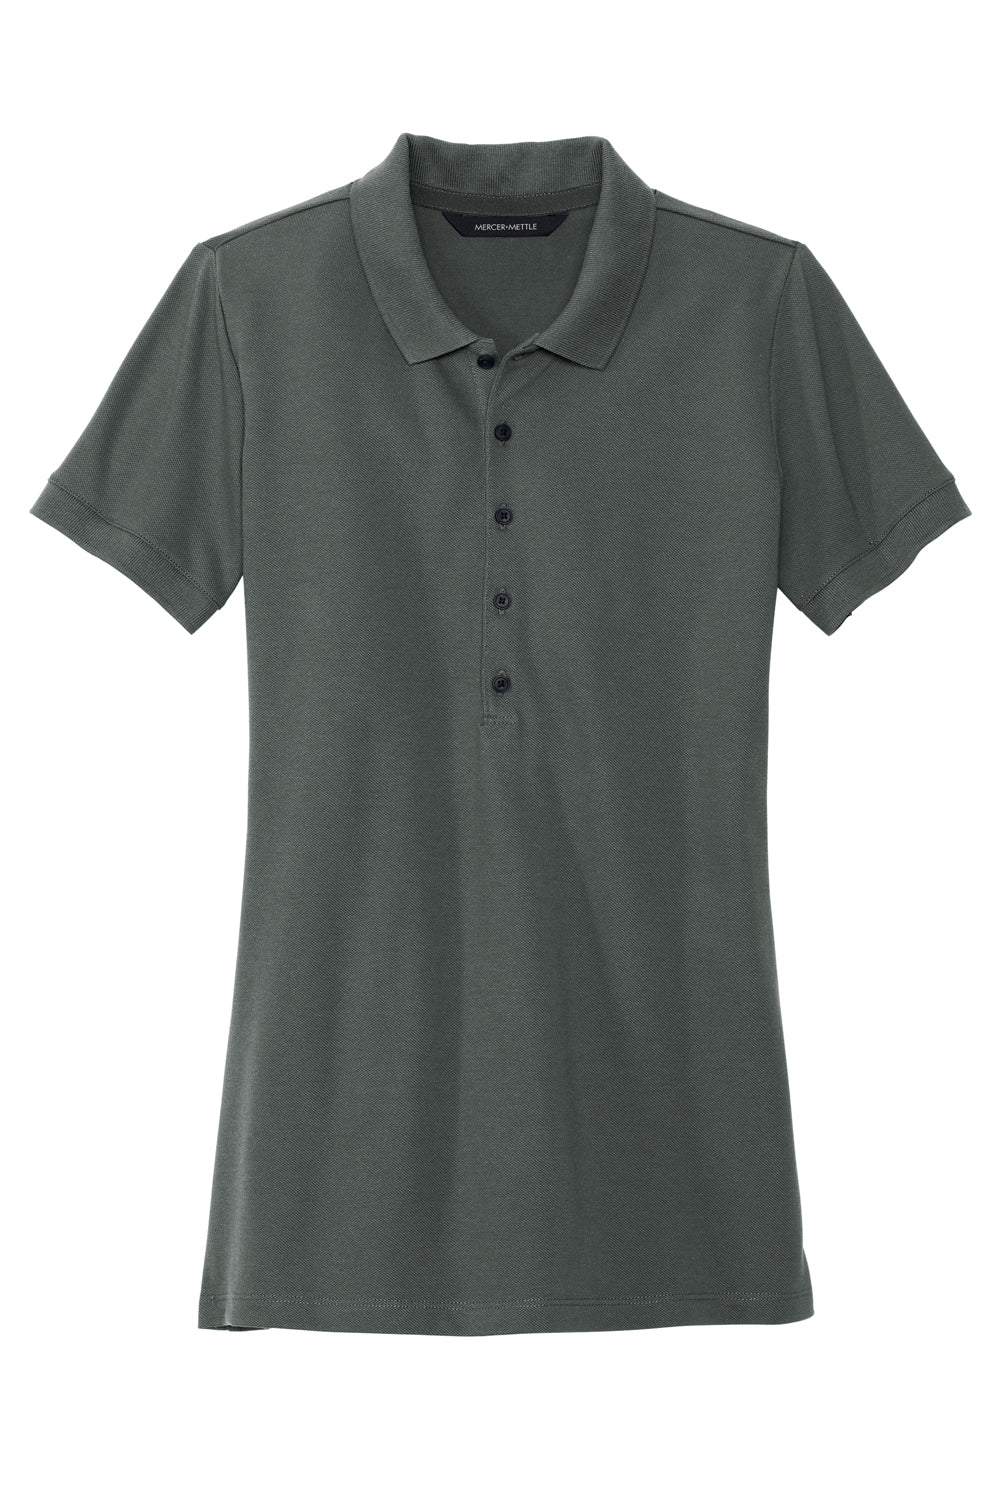 Mercer+Mettle MM1001 Stretch Pique Short Sleeve Polo Shirt Anchor Grey Flat Front